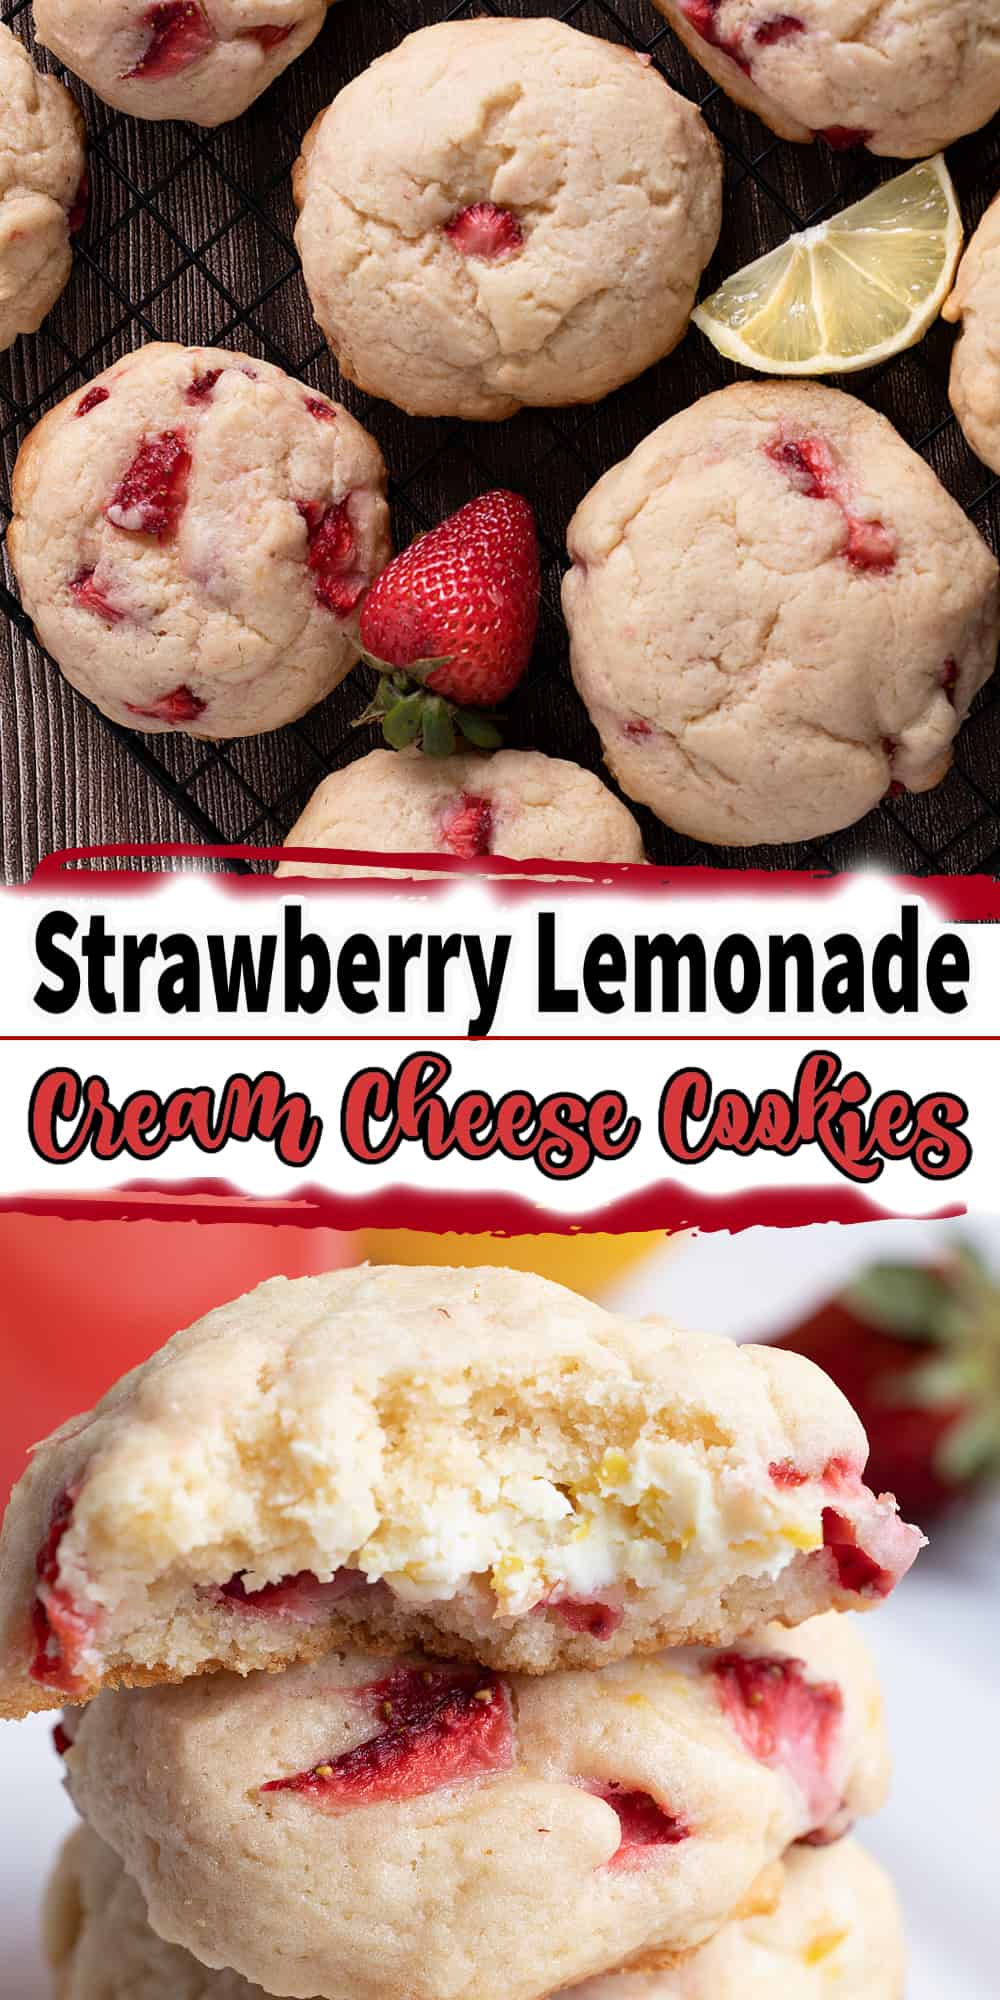 strawberry lemonade cream cheese cookies with text